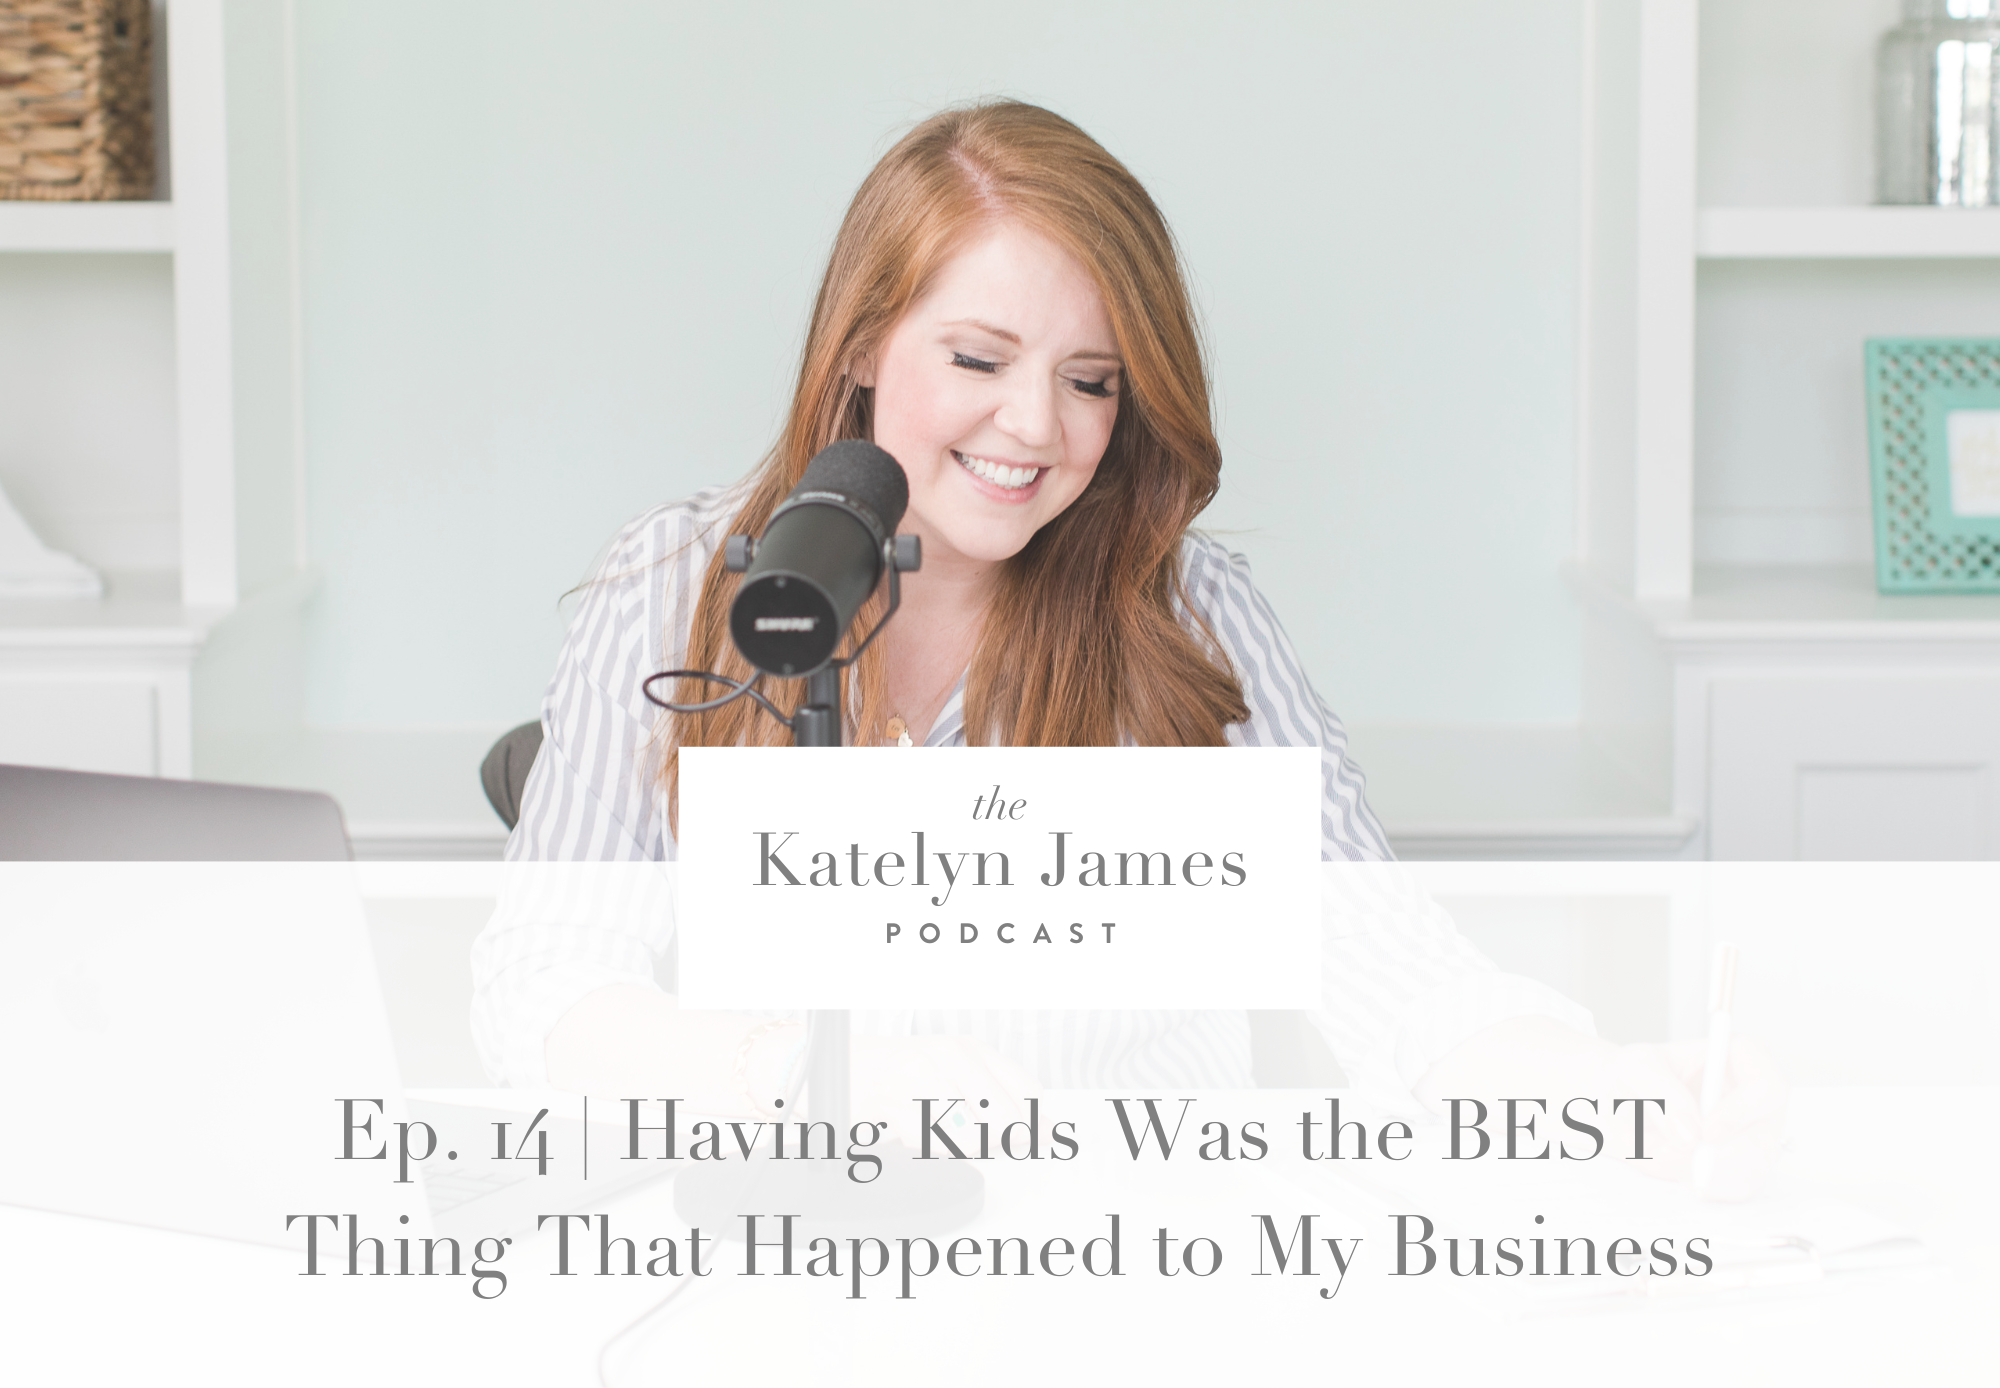 Having Kids was the best thing that happened to my business